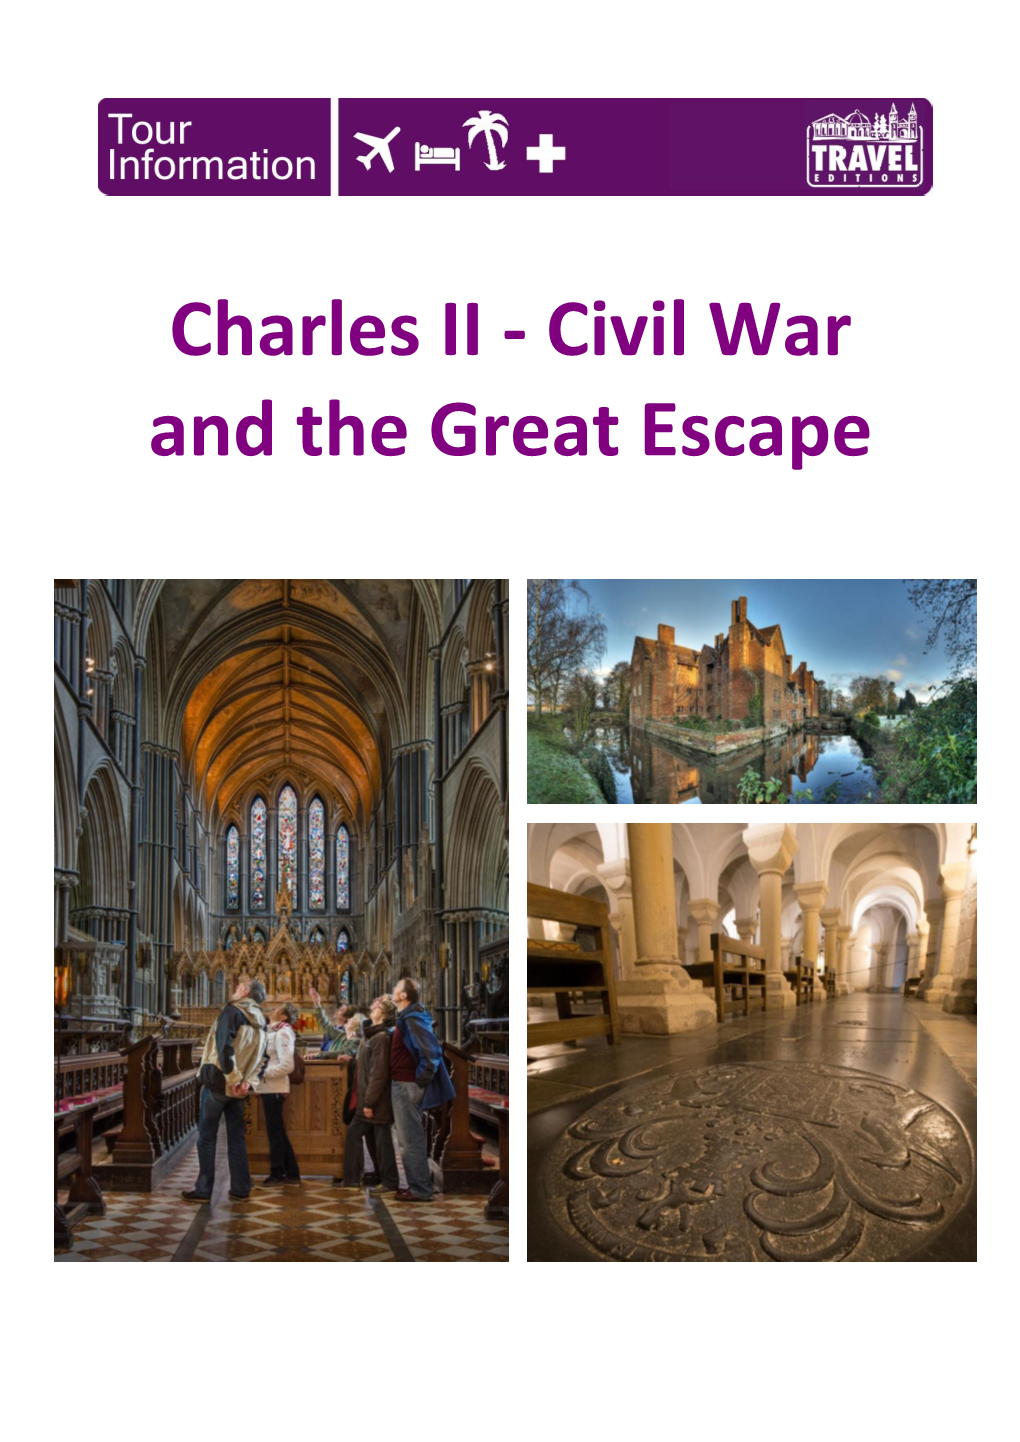 Charles II - Civil War and the Great Escape